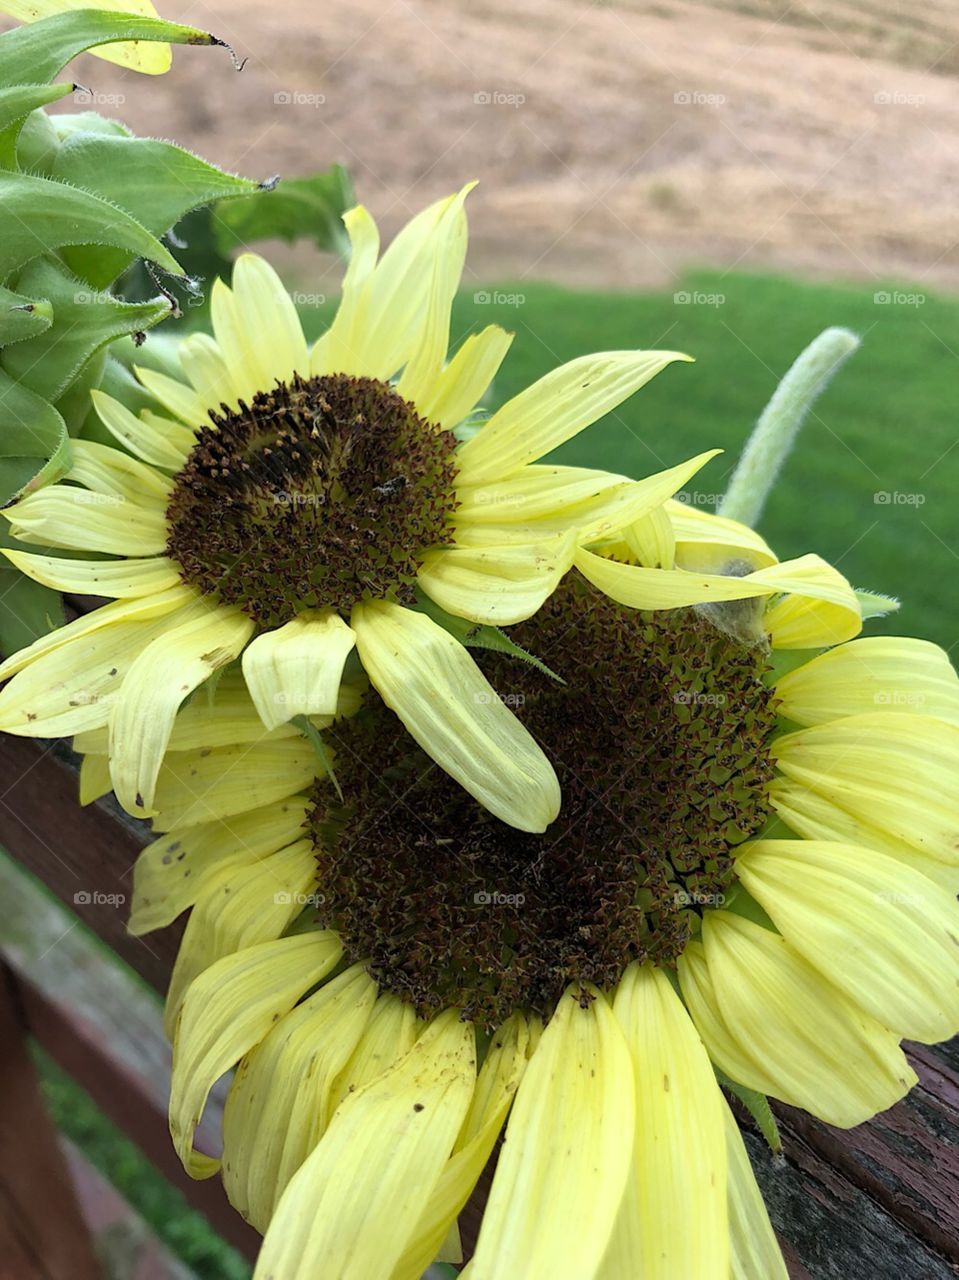 Clipped Sunflowers 